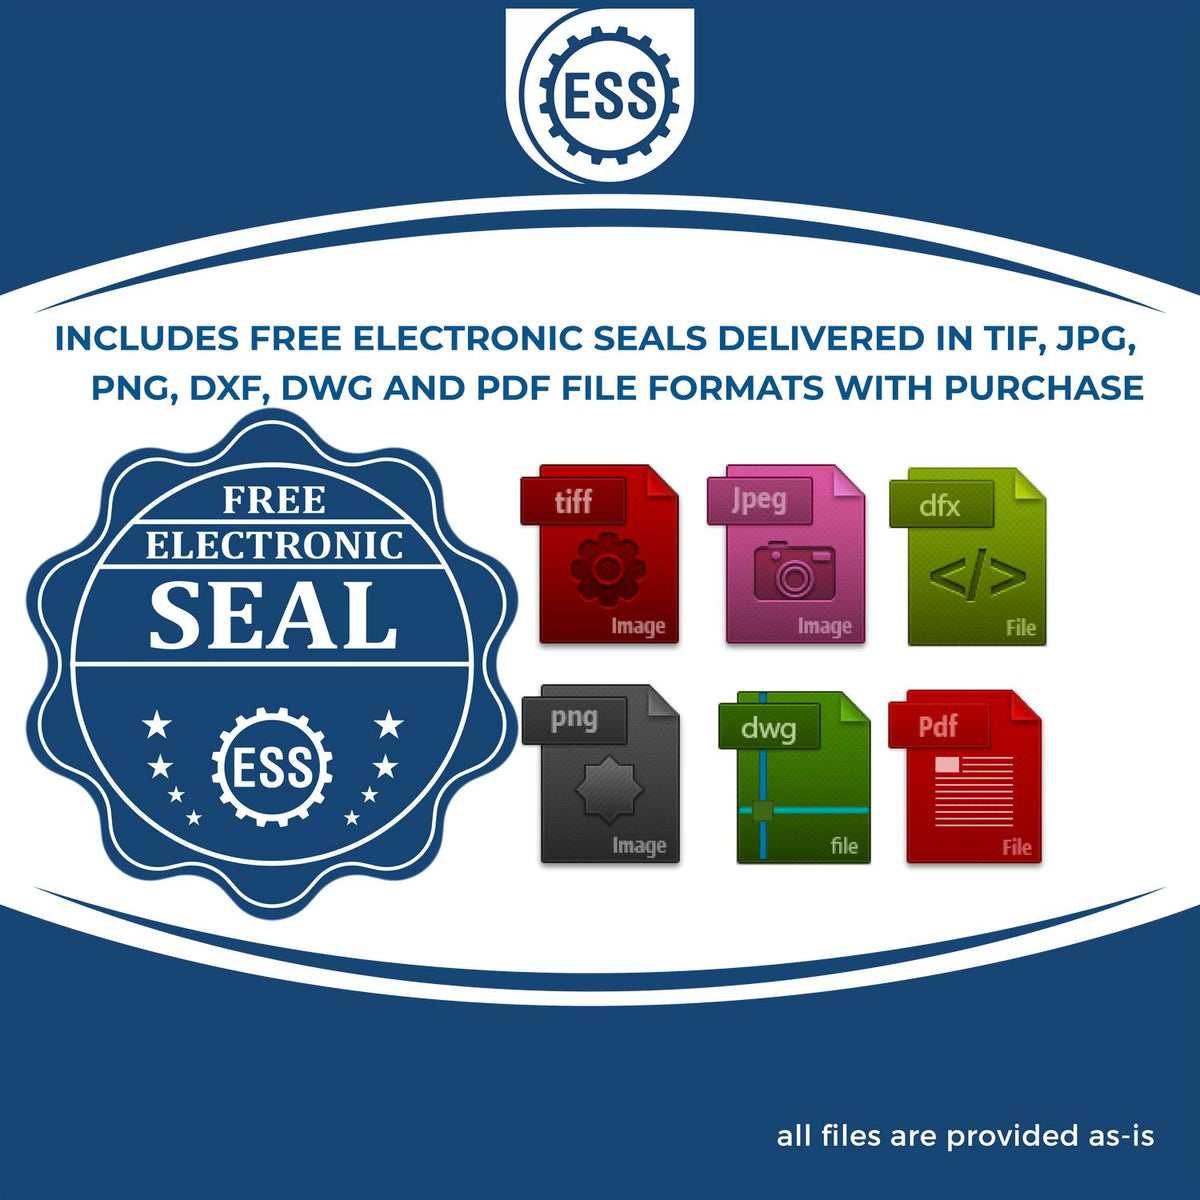 An infographic for the free electronic seal for the Hybrid Utah Engineer Seal illustrating the different file type icons such as DXF, DWG, TIF, JPG and PNG.